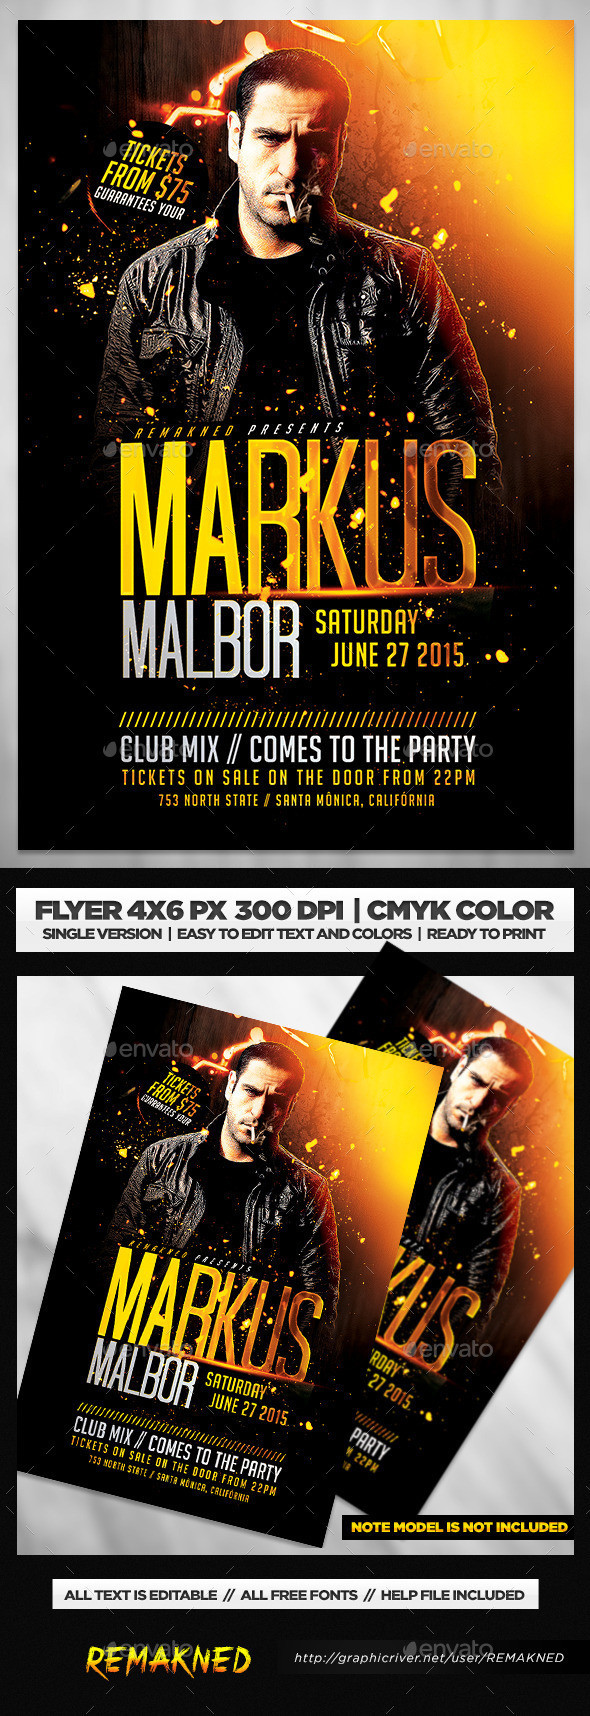 Electro 20night 20flyer 20template 20psd